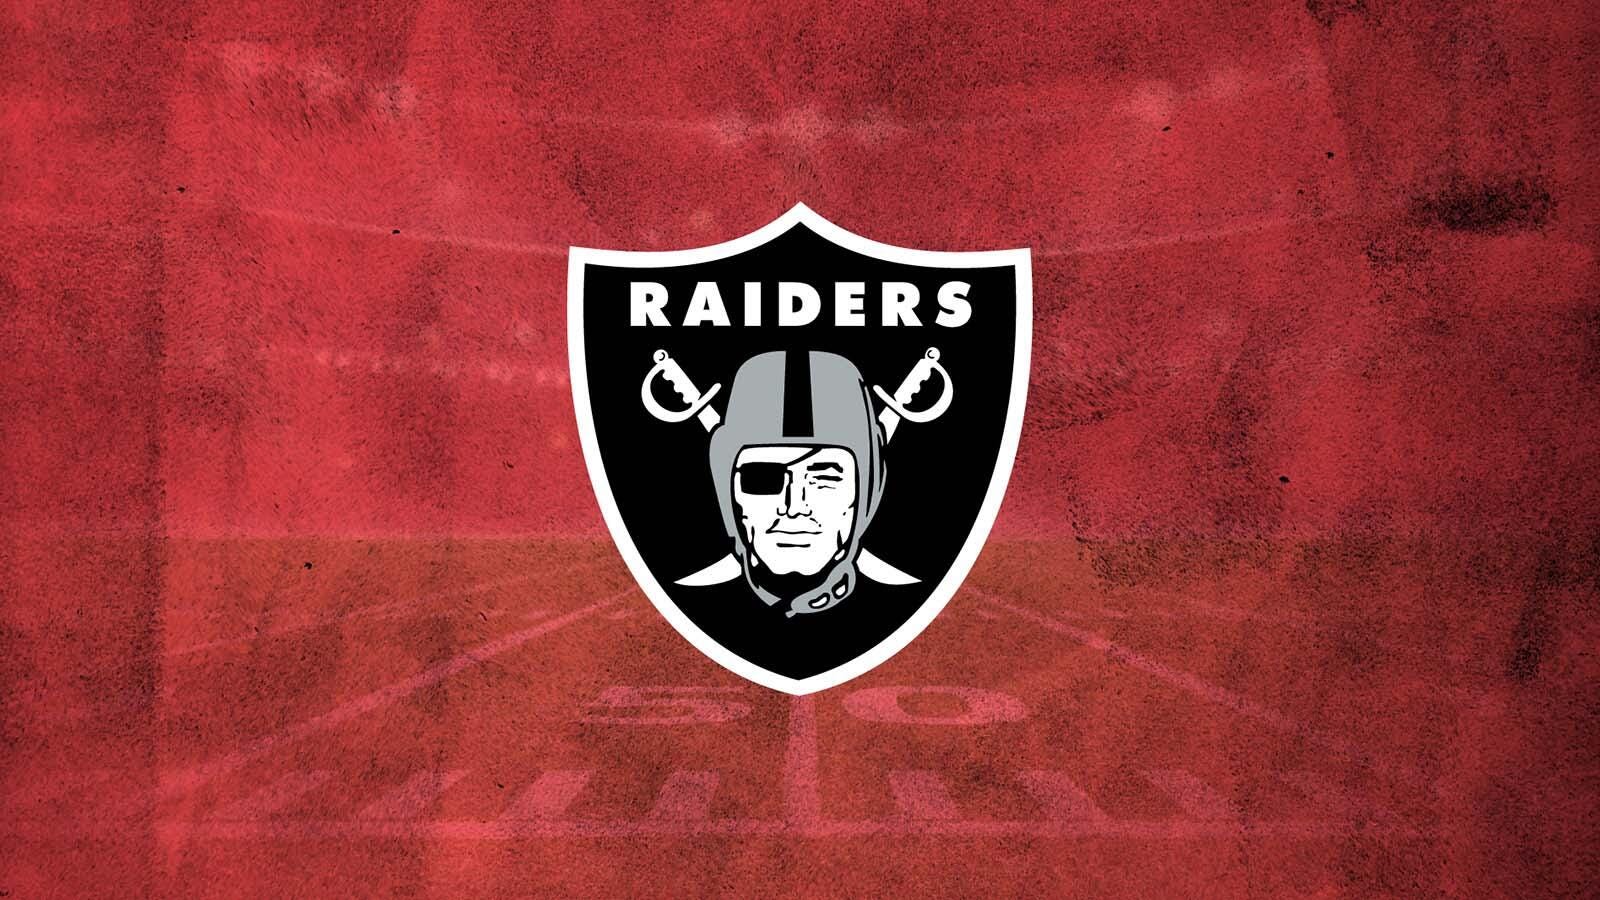 How to Watch the Las Vegas Raiders Live in 2023